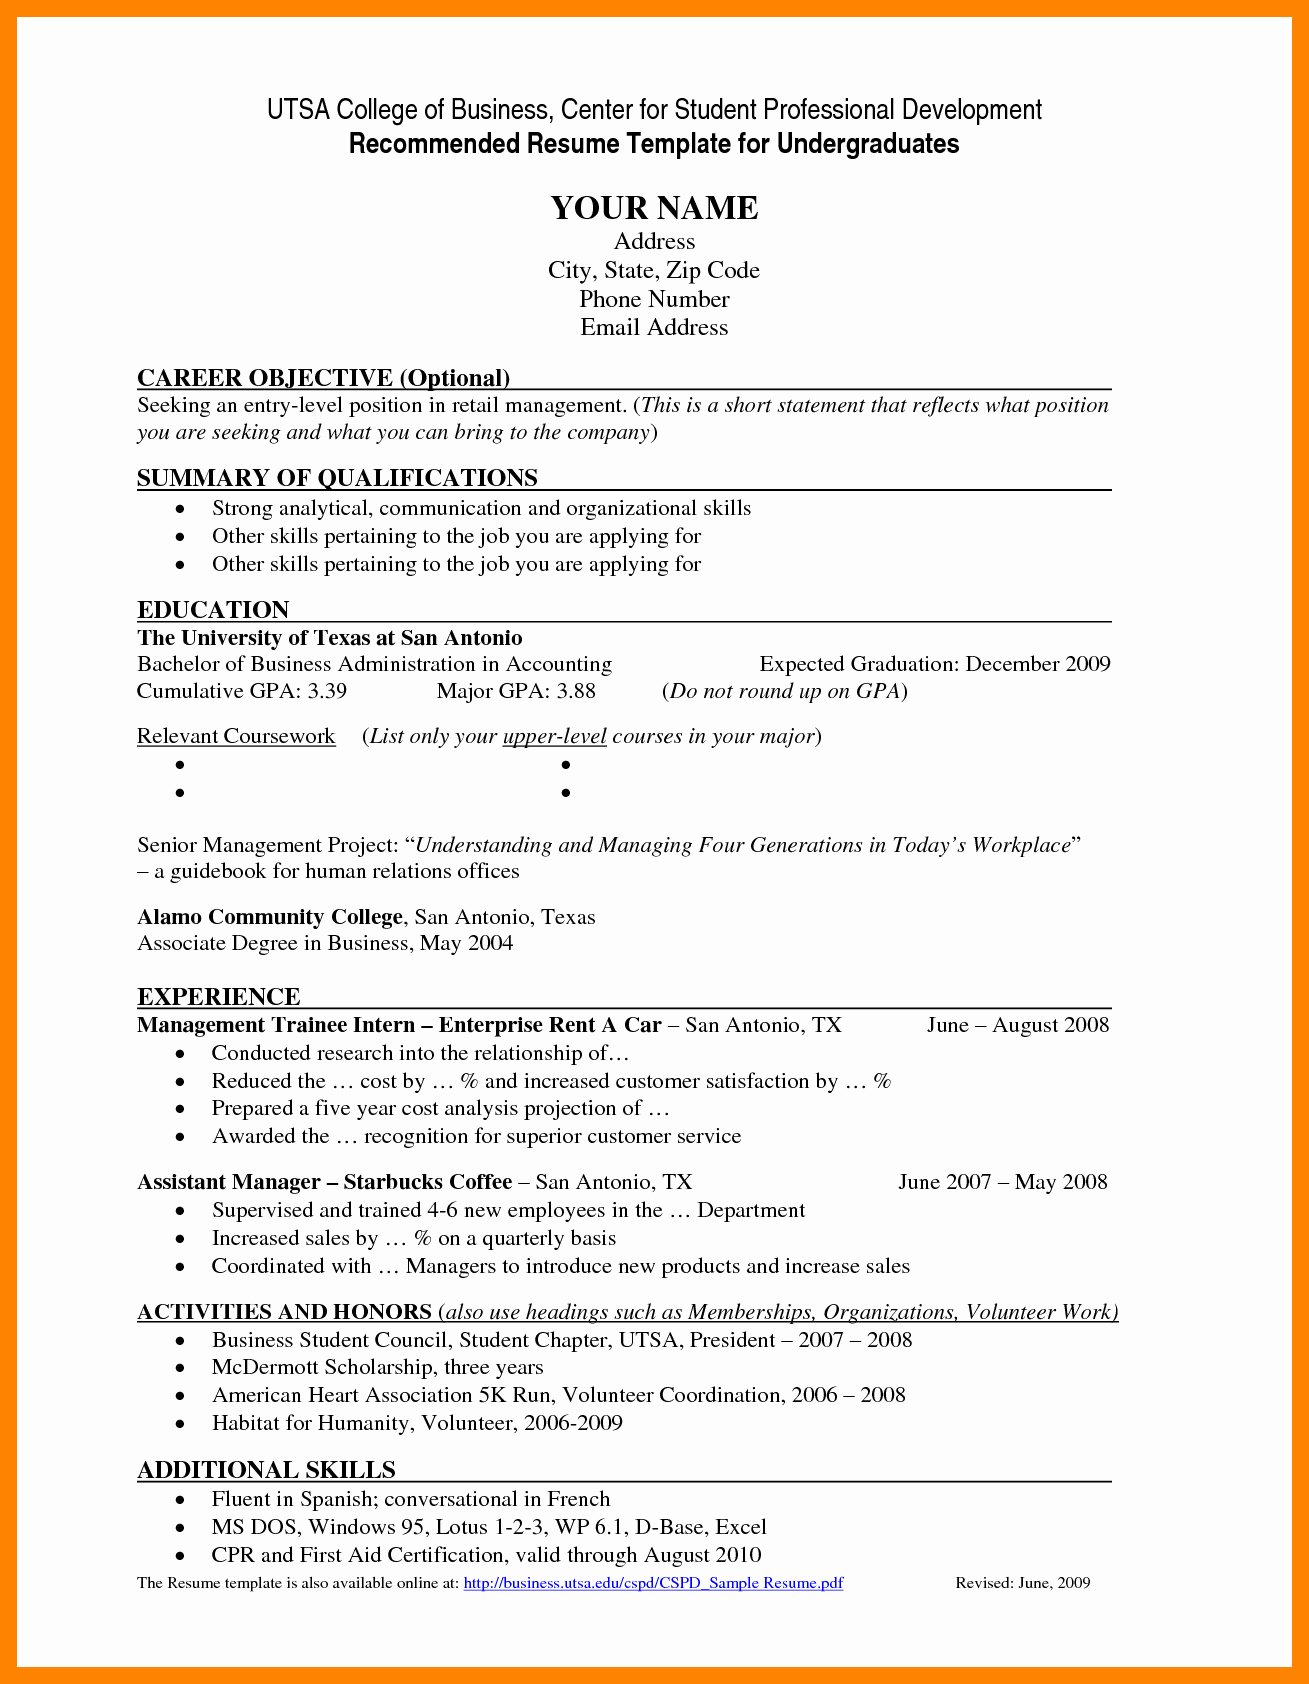 Resume Objective Examples for Recent College Graduates